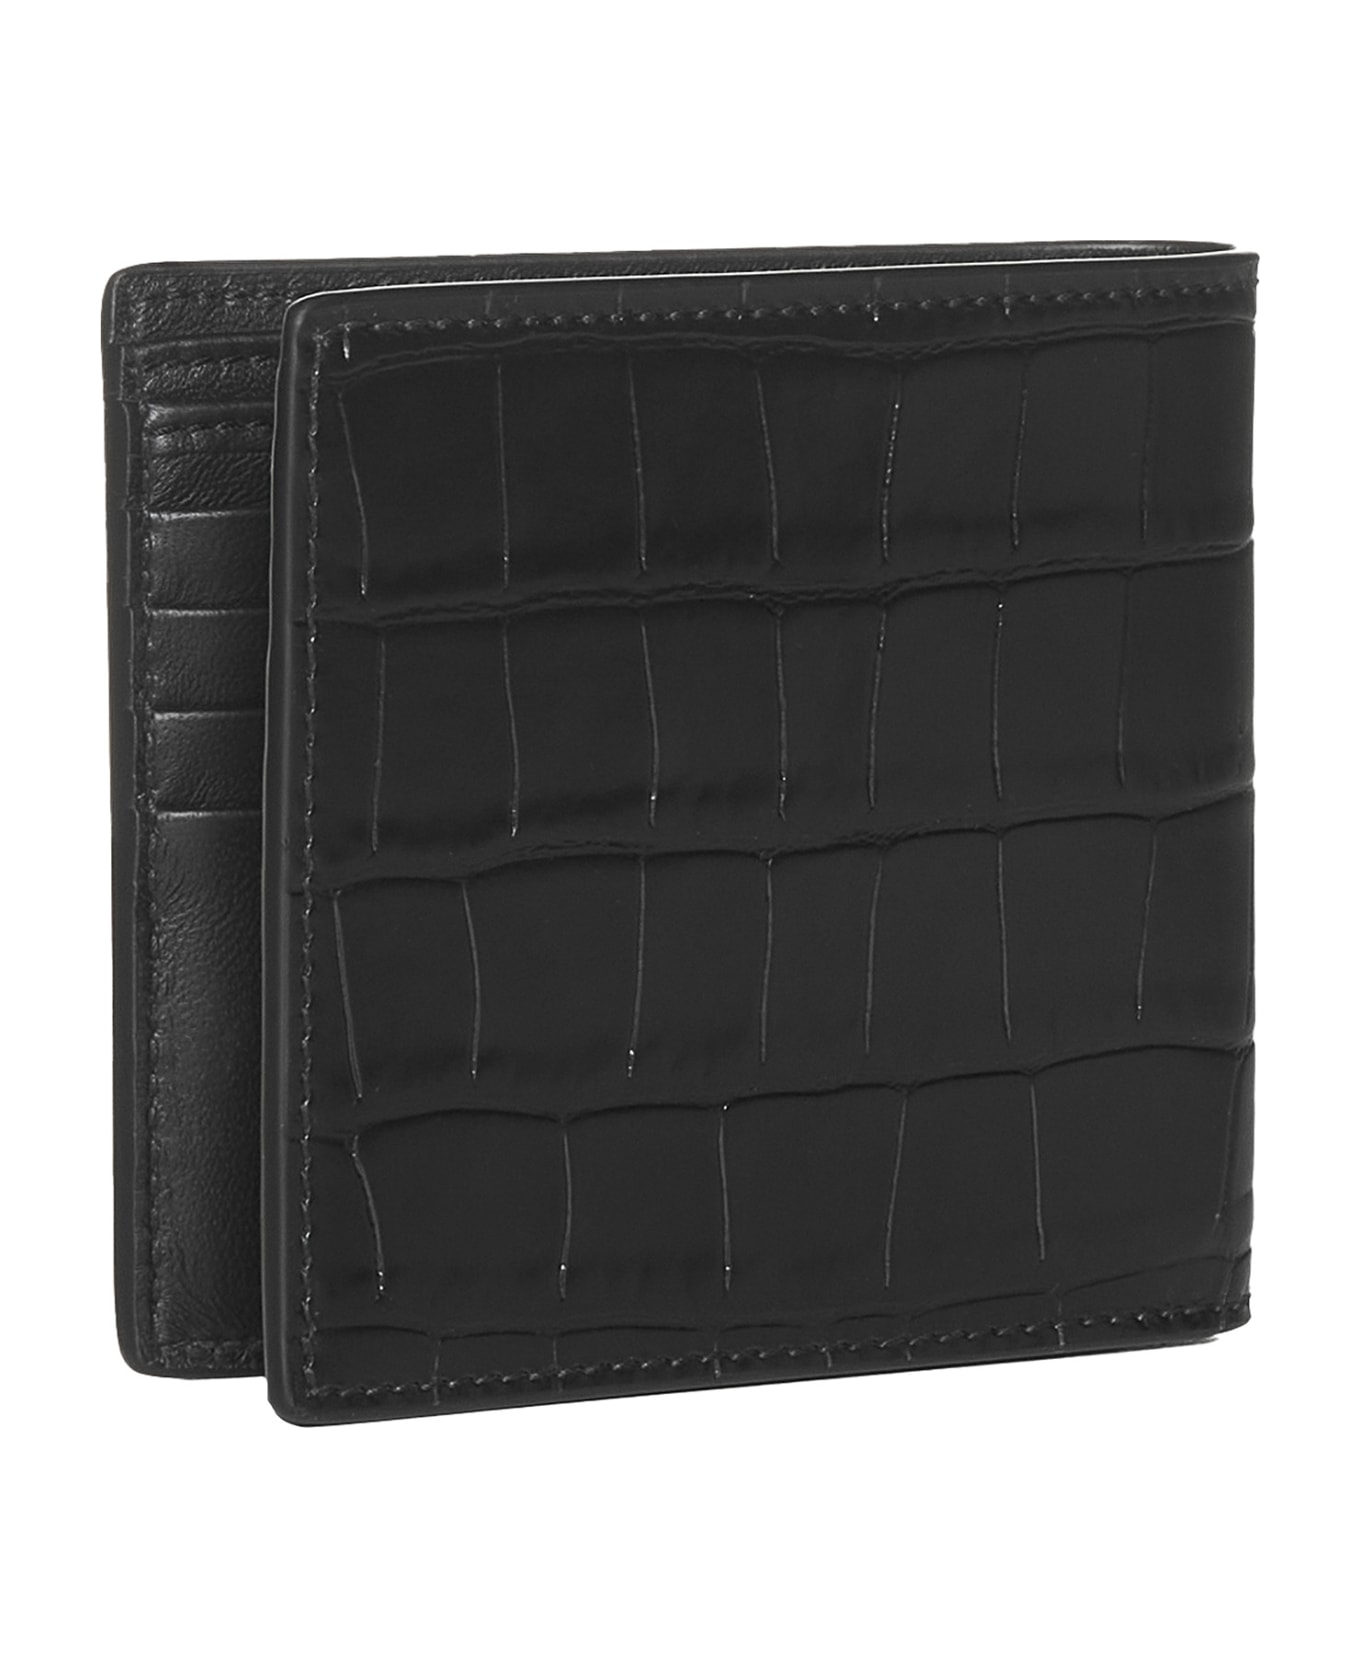 Alexander McQueen Bi-fold Wallet With Mini Skull Patch In Croco Embossed Leather - Nero 財布